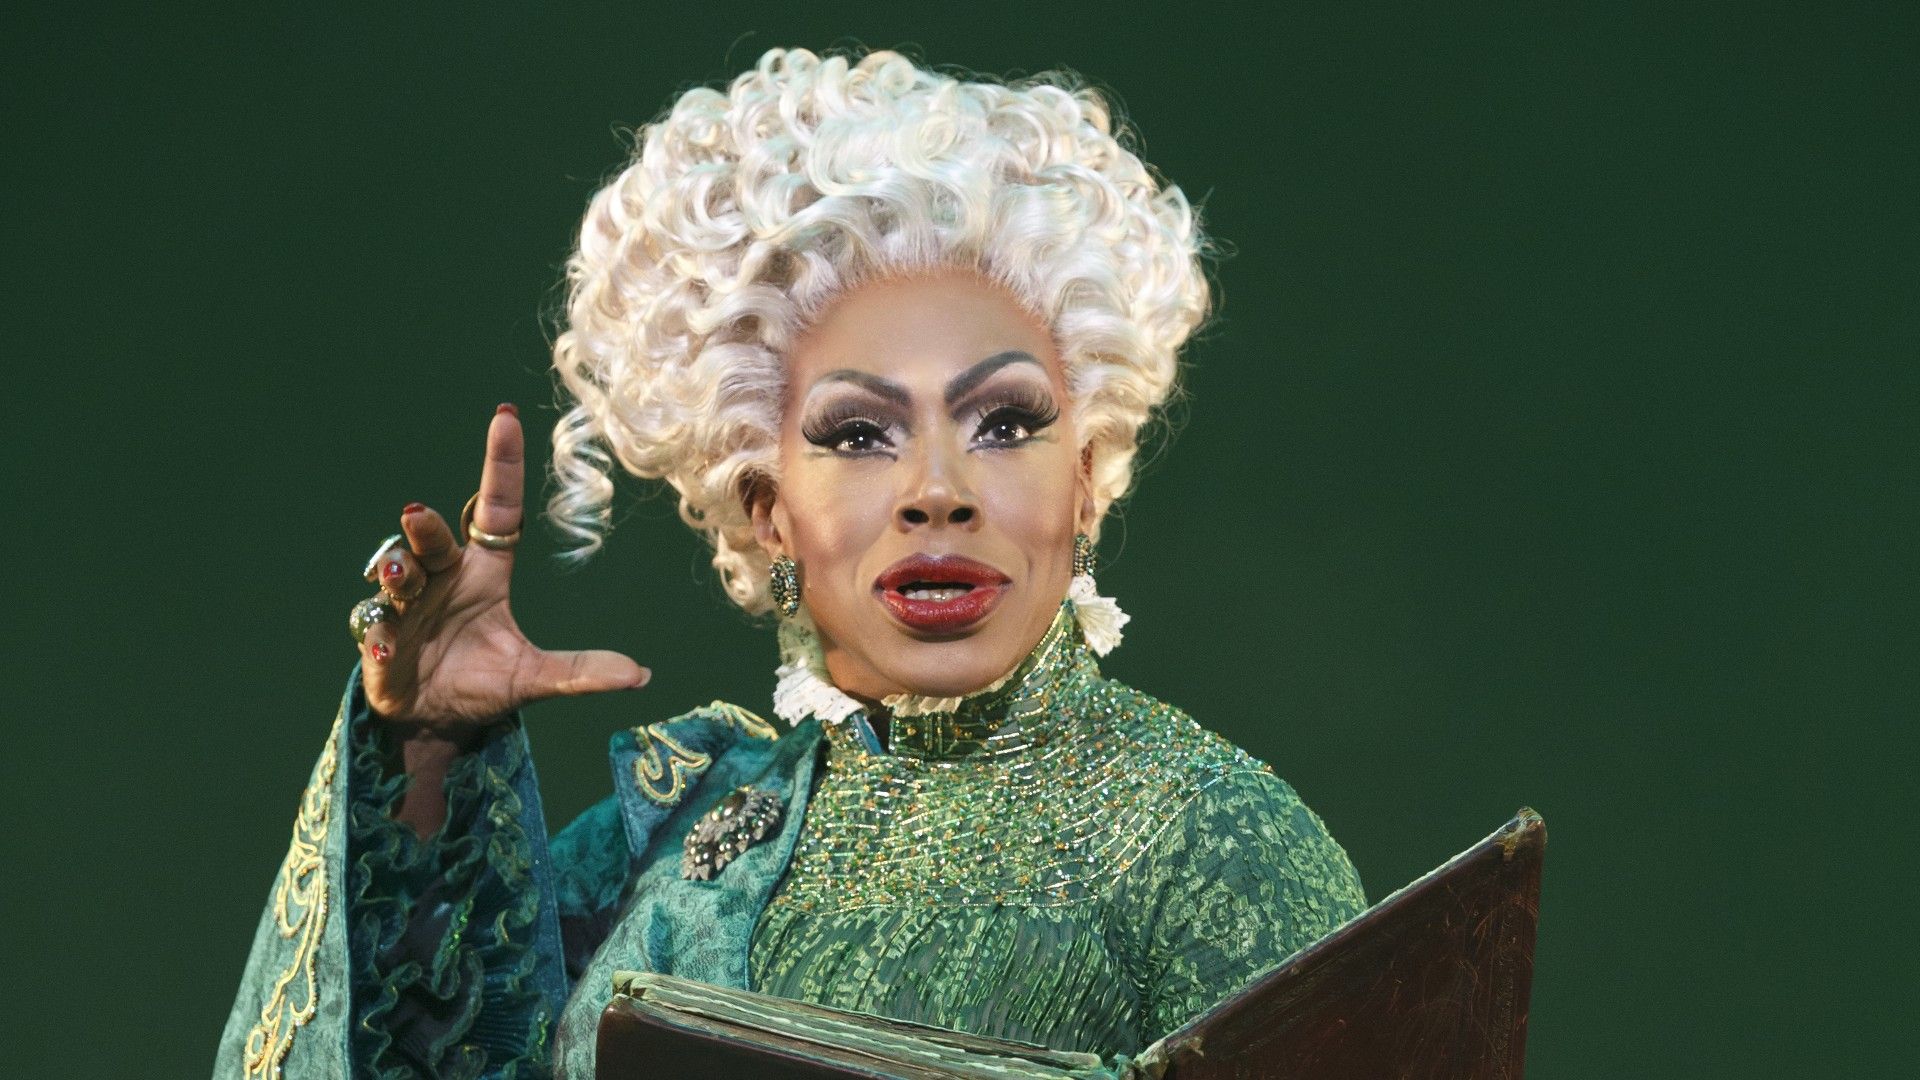 Call Me Madame: Backstage at 'Wicked' with Sheryl Lee Ralph background